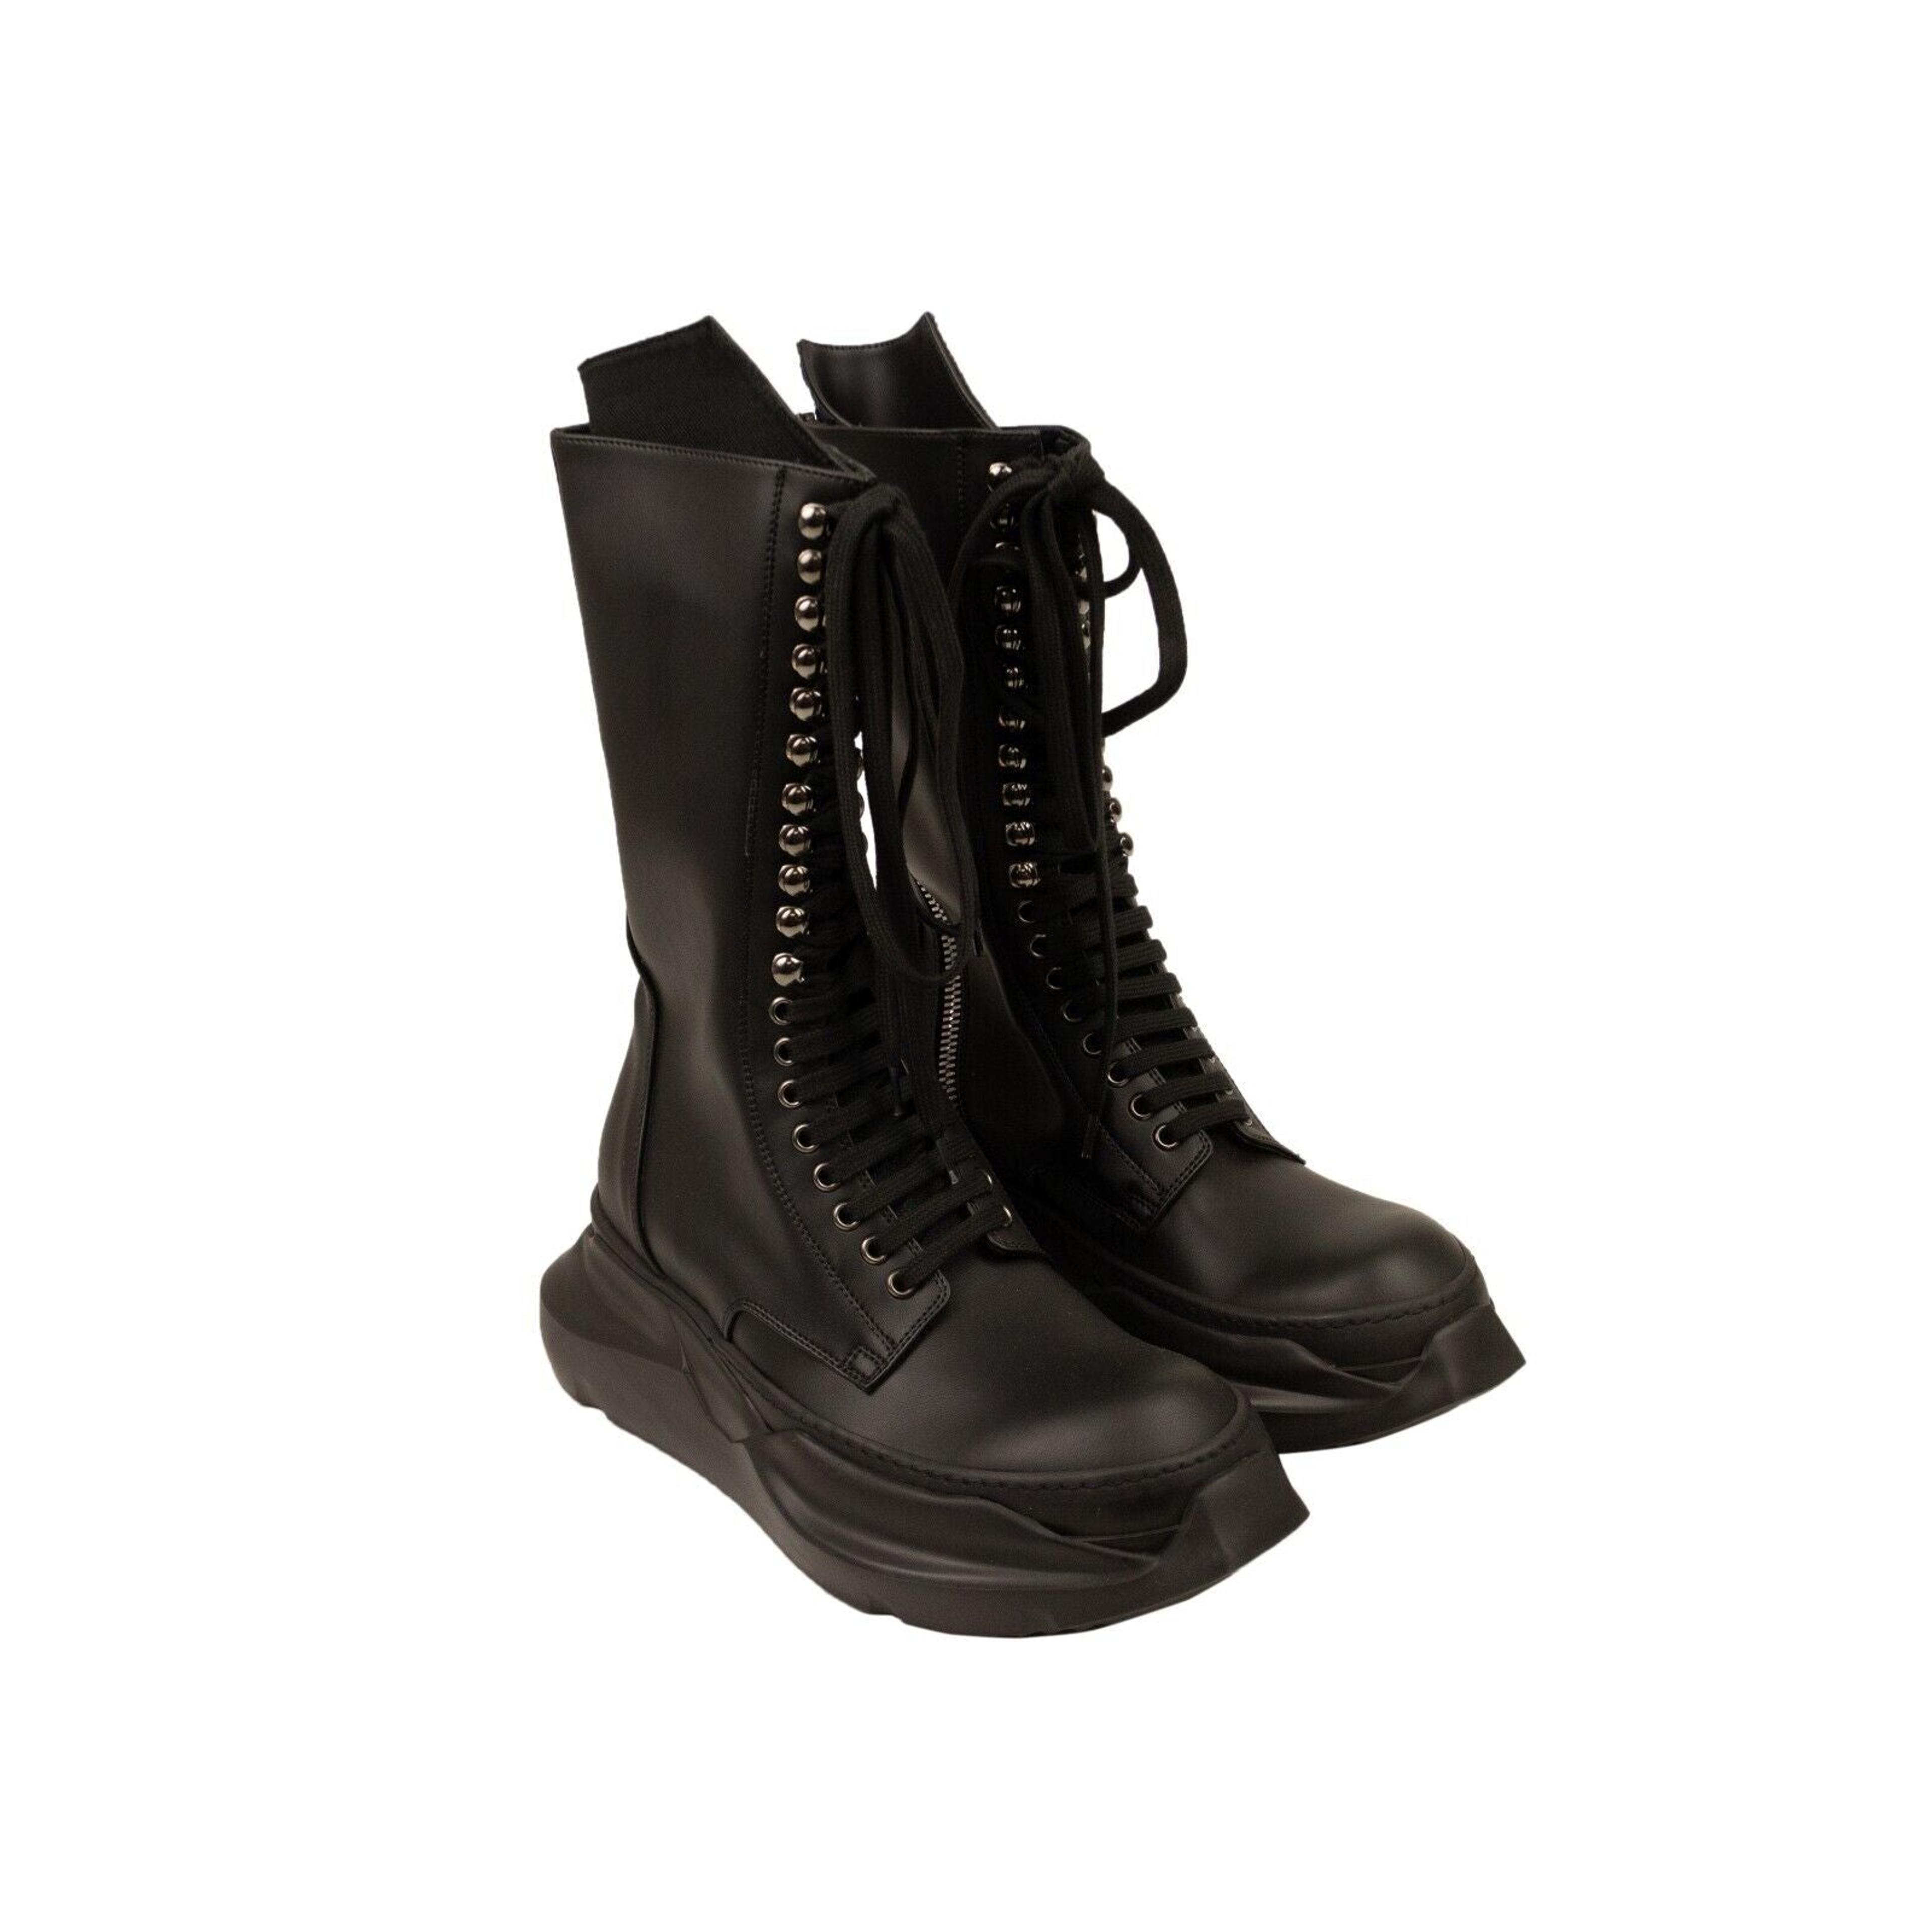 Alternate View 2 of Black Army Abstract Sneaker Boots